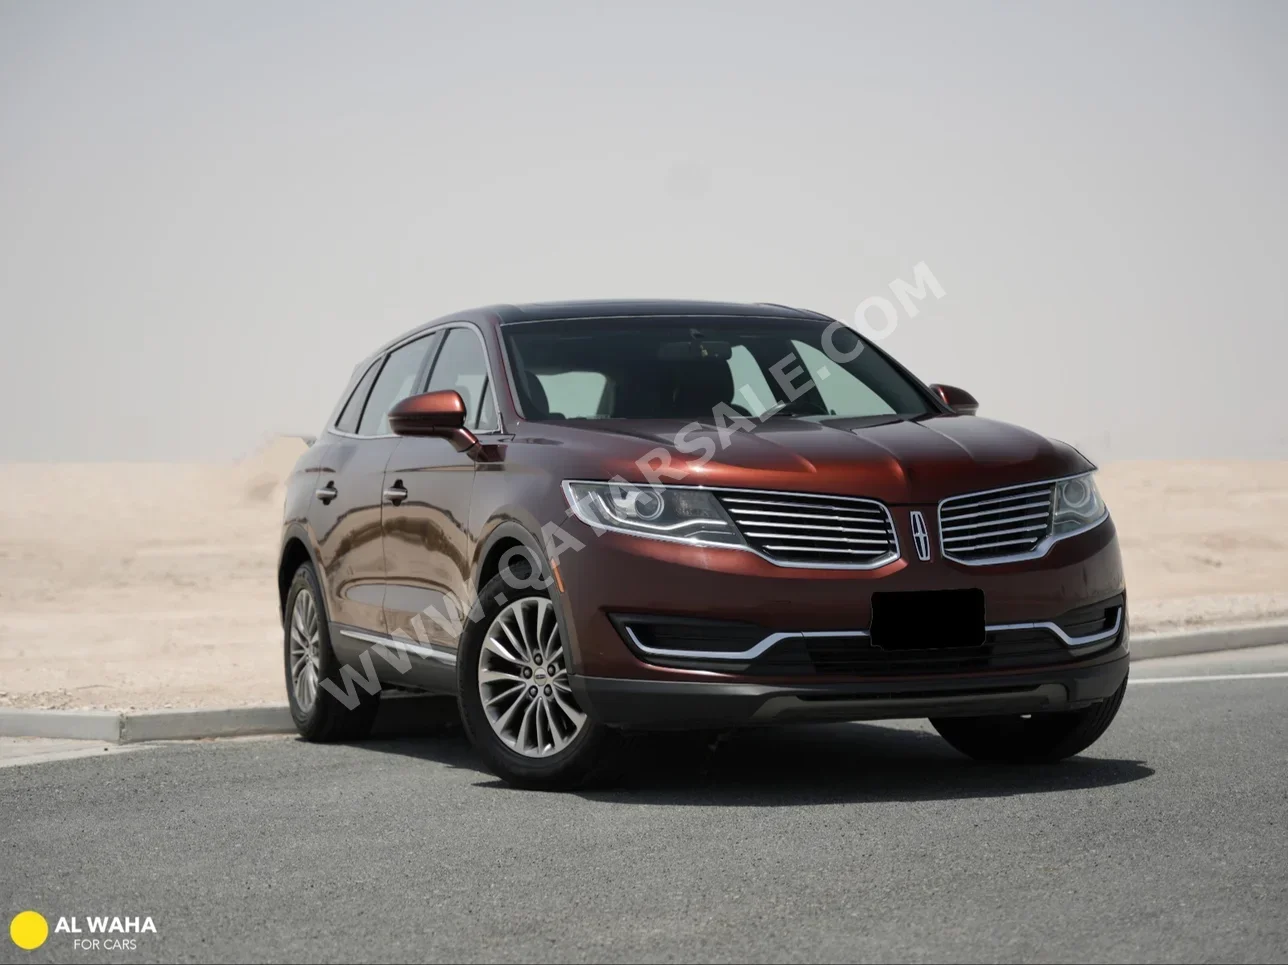 Lincoln  MKX  2016  Automatic  117,900 Km  6 Cylinder  Four Wheel Drive (4WD)  SUV  Maroon